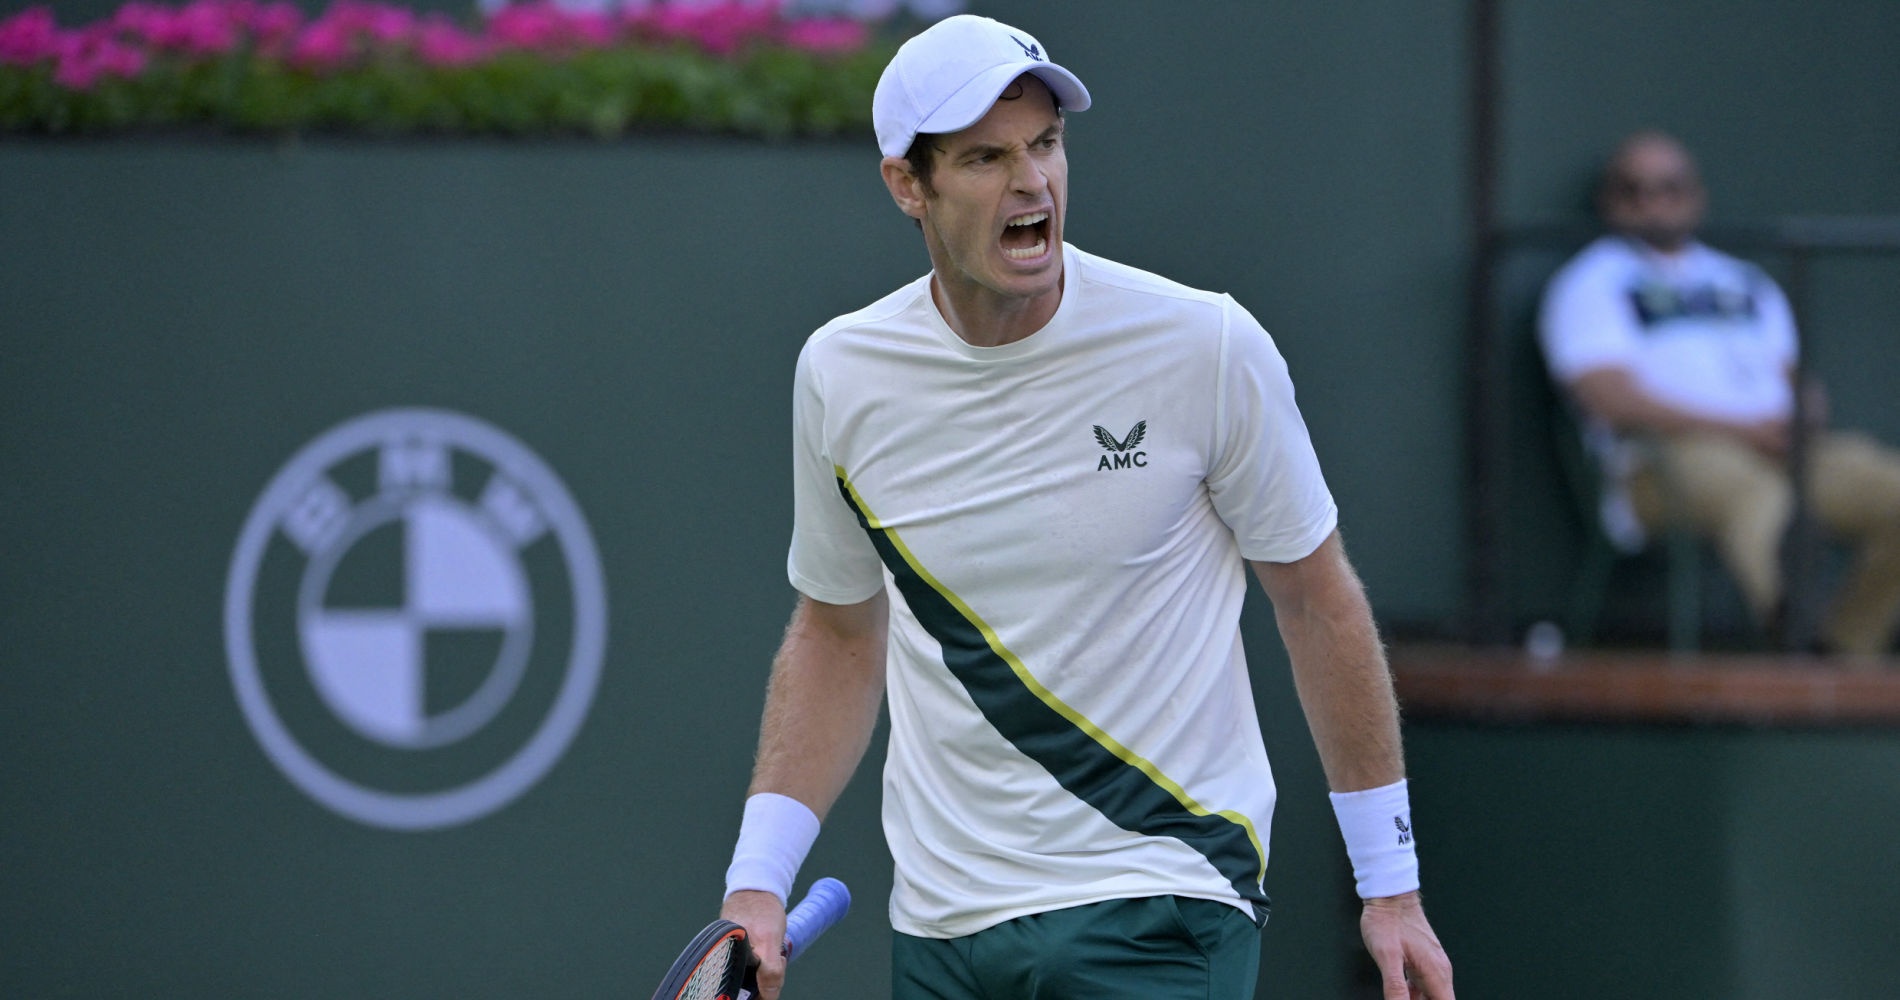 Indian Wells Murray comes back again to win